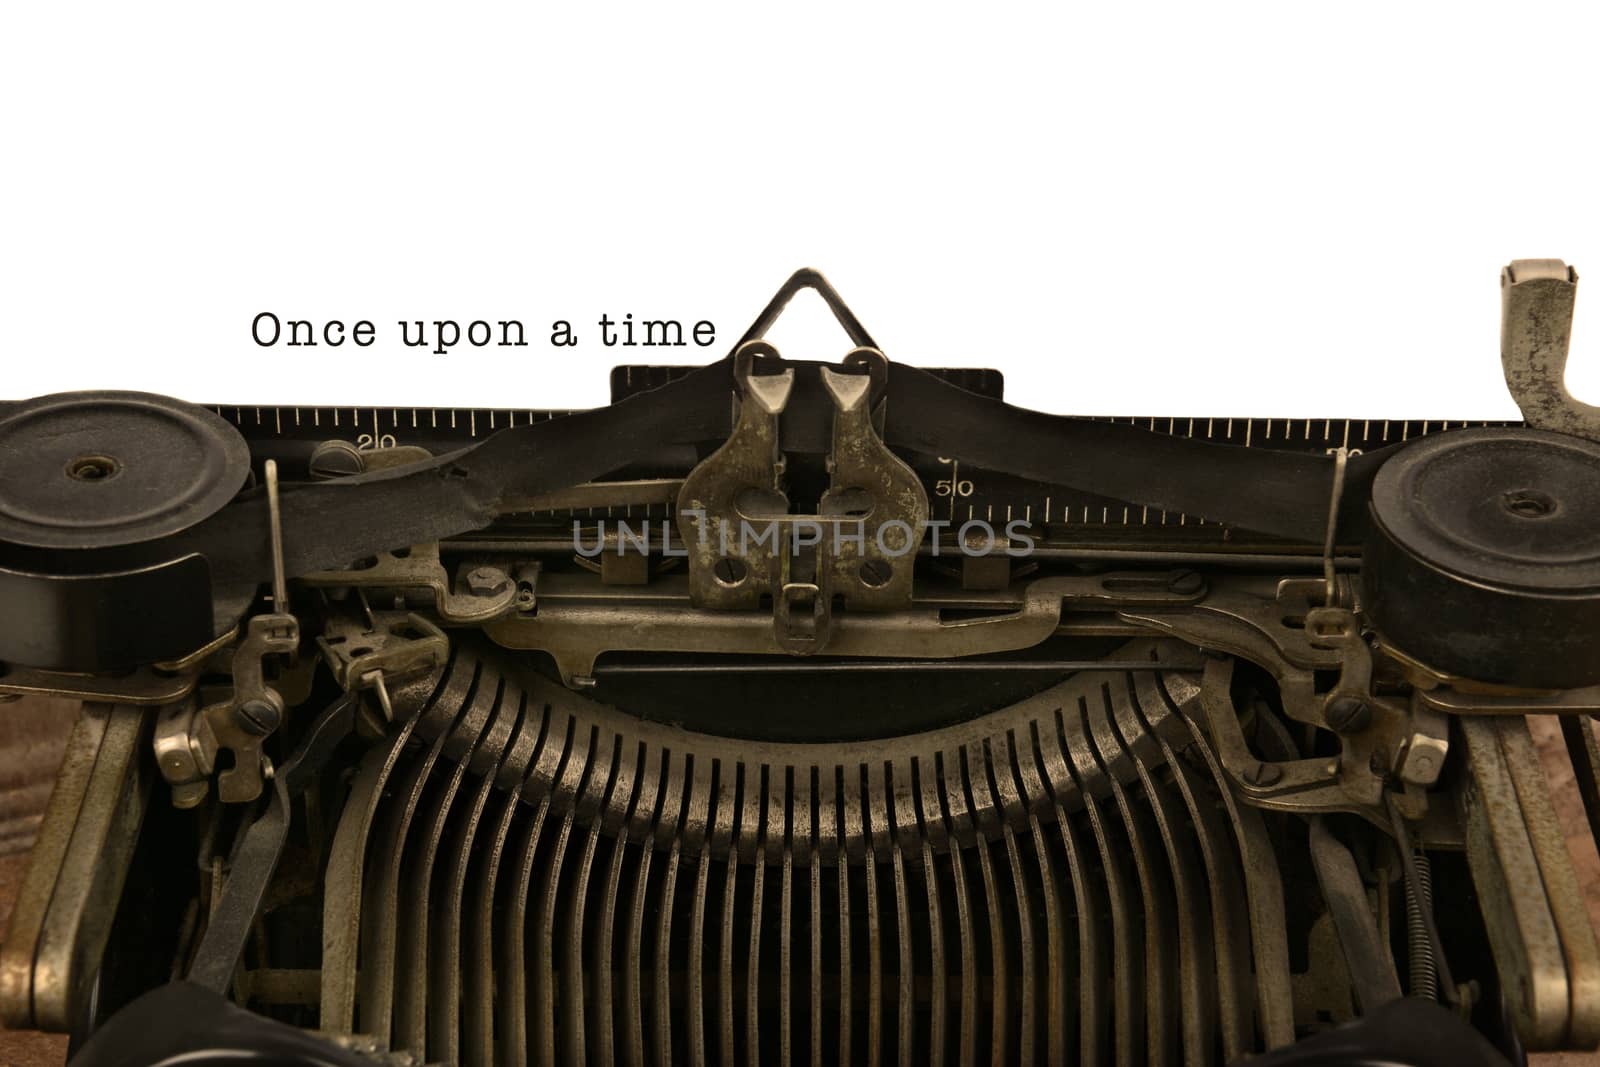 An old fashioned typewriter with the words Once upon a time. Closeup of the antique machines ribbon and carriage. With warm vintage tones.